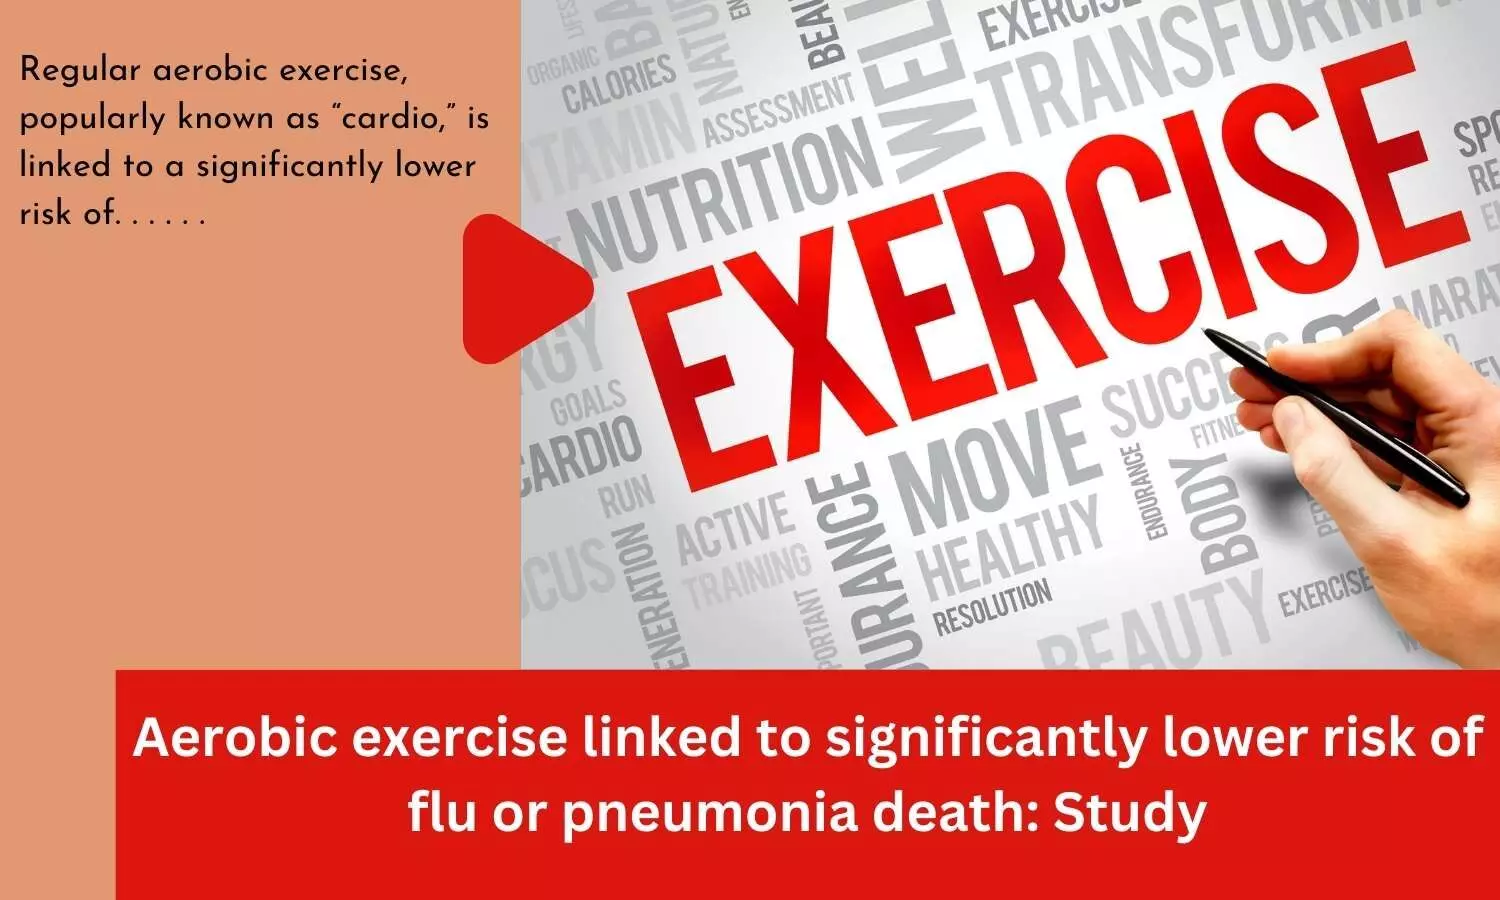 Aerobic exercise linked to significantly lower risk of flu or pneumonia death: Study